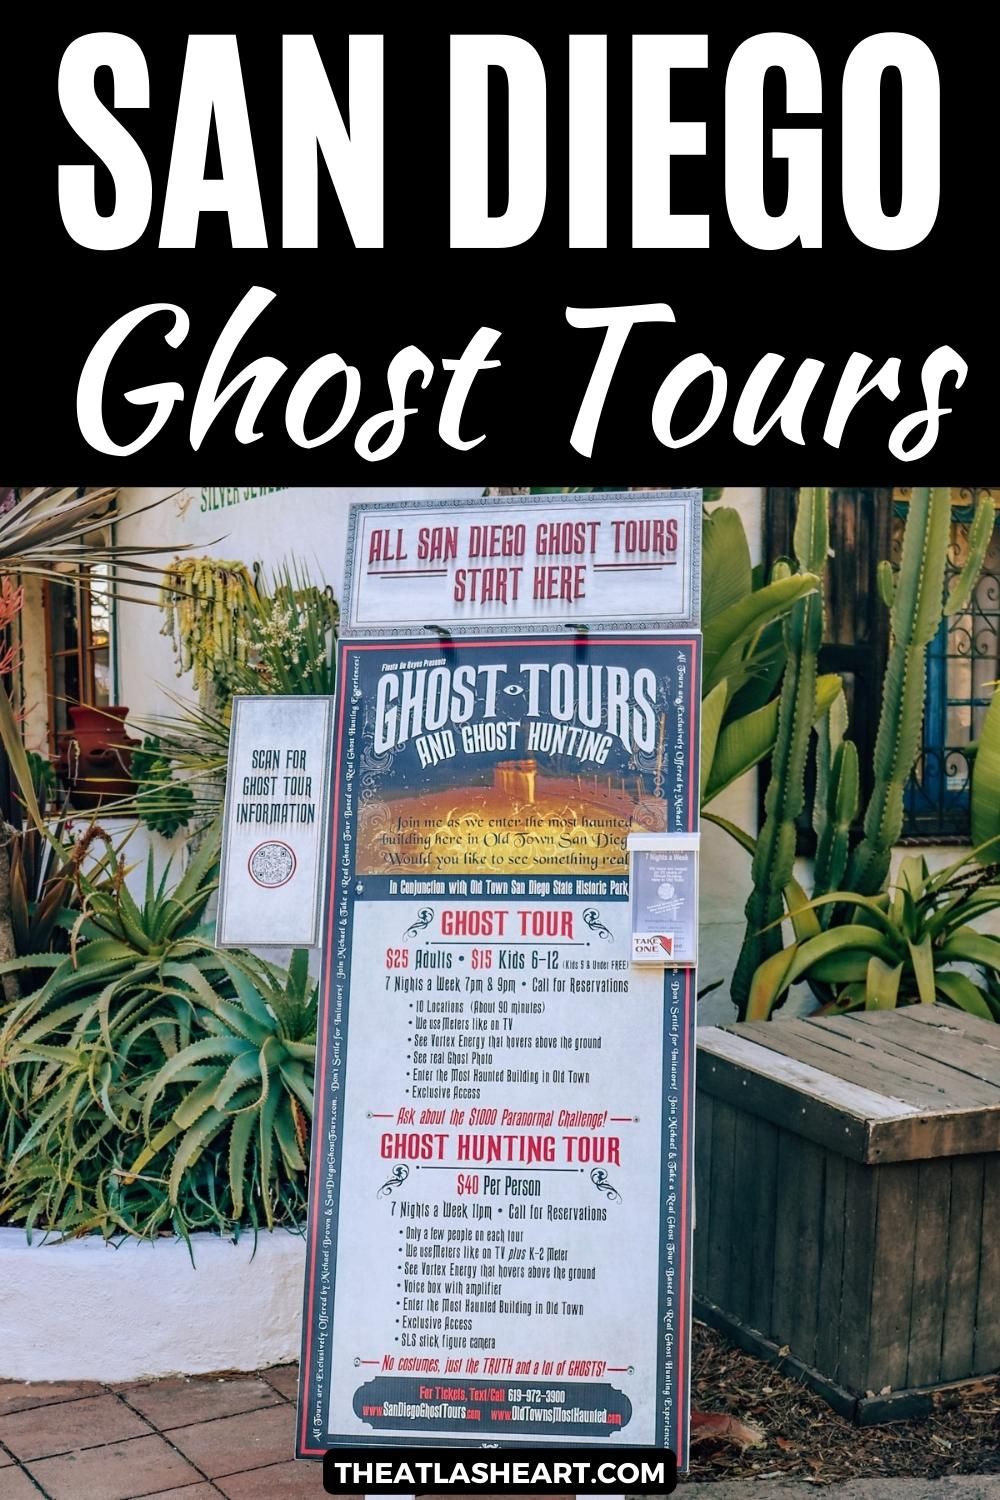 A sandwich board advertising San Diego ghost tours in front of a planter box filled with various types of cacti, with the text overlay, "Ghost Tours in San Diego."